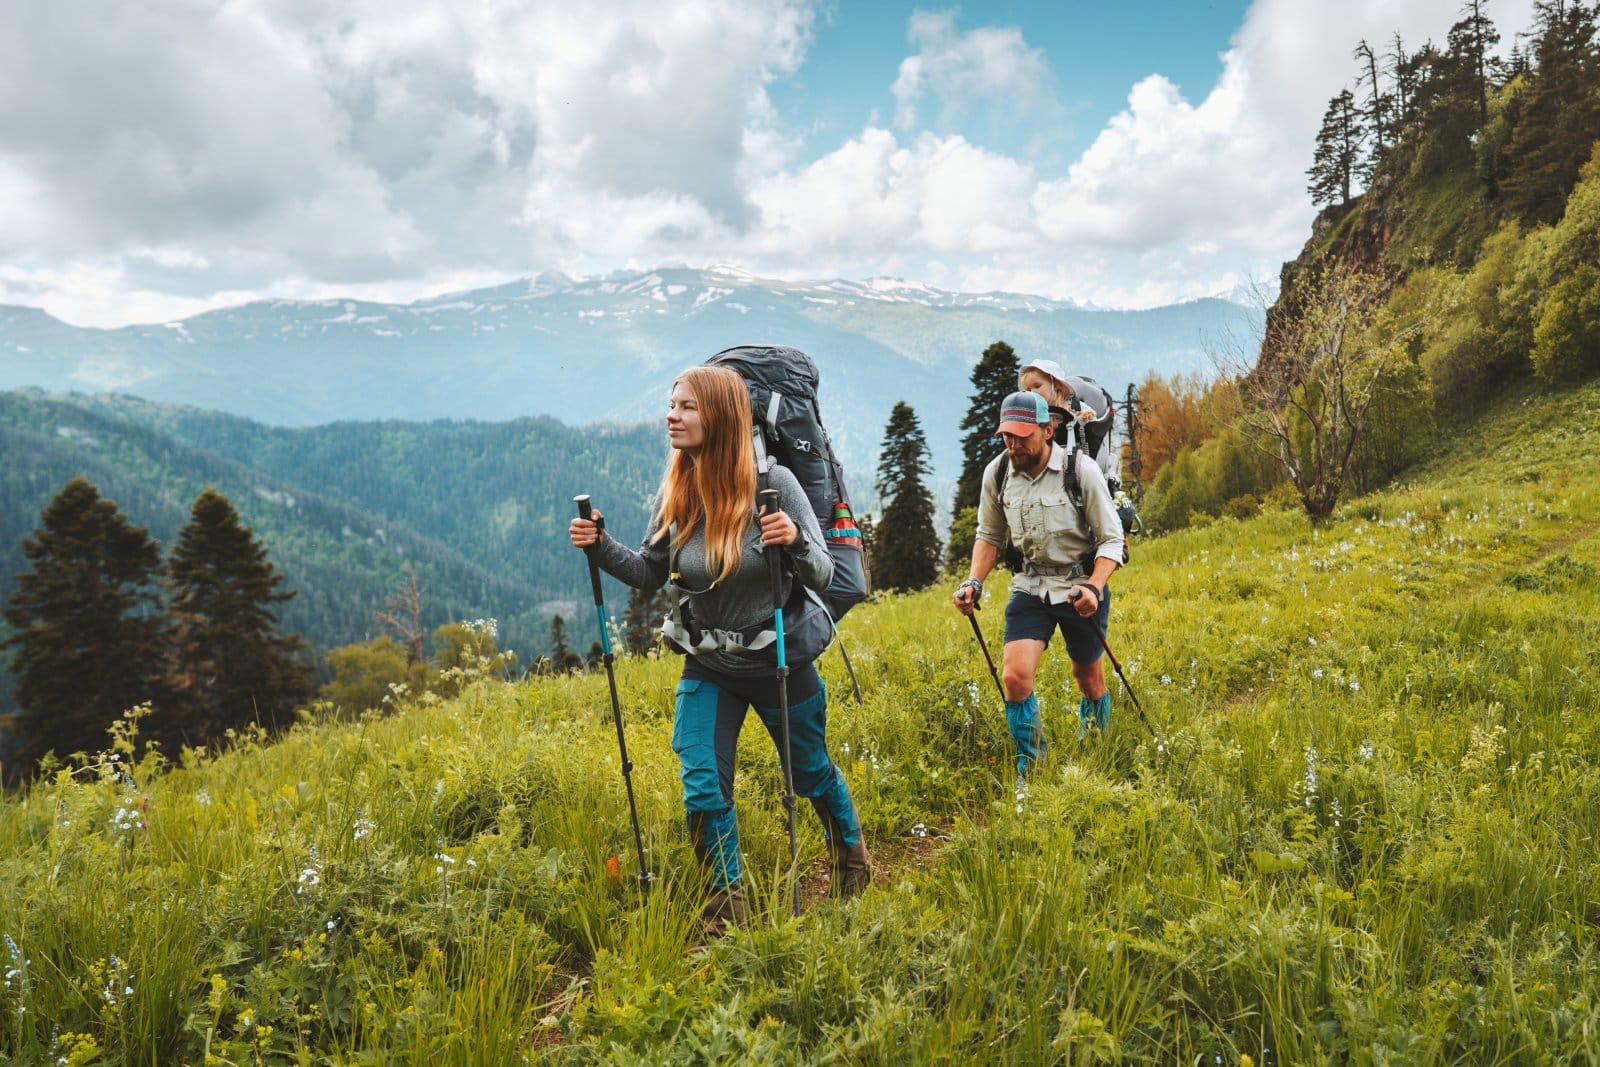 <p class="wp-caption-text">Image Credit: Shutterstock / everst</p>  <p><span>Sustainable travel on a budget is not only possible; it’s a rewarding way to explore the world while respecting and preserving its natural and cultural treasures. By making thoughtful choices about where you stay, how you get around, and how you interact with the environment and local communities, you can positively impact the places you visit. These tips offer a starting point for planning your eco-friendly adventures, encouraging a travel ethos that values conservation, community, and mindfulness. As you embark on your sustainable journey, remember that every small choice contributes to a larger global effort to protect and celebrate our planet’s incredible diversity and beauty.</span></p> <p><span>More Articles Like This…</span></p> <p><a href="https://thegreenvoyage.com/barcelona-discover-the-top-10-beach-clubs/"><span>Barcelona: Discover the Top 10 Beach Clubs</span></a></p> <p><a href="https://thegreenvoyage.com/top-destination-cities-to-visit/"><span>2024 Global City Travel Guide – Your Passport to the World’s Top Destination Cities</span></a></p> <p><a href="https://thegreenvoyage.com/exploring-khao-yai-a-hidden-gem-of-thailand/"><span>Exploring Khao Yai 2024 – A Hidden Gem of Thailand</span></a></p> <p><span>The post <a href="https://passingthru.com/best-ways-to-travel-without-breaking-the-bank/">8 Best Ways to Travel Without Breaking the Bank</a> republished on </span><a href="https://passingthru.com/"><span>Passing Thru</span></a><span> with permission from </span><a href="https://thegreenvoyage.com/"><span>The Green Voyage</span></a><span>.</span></p> <p>Featured Image Credit: Shutterstock / Jacob Lund.</p> <p><span>For transparency, this content was partly developed with AI assistance and carefully curated by an experienced editor to be informative and ensure accuracy.</span></p>